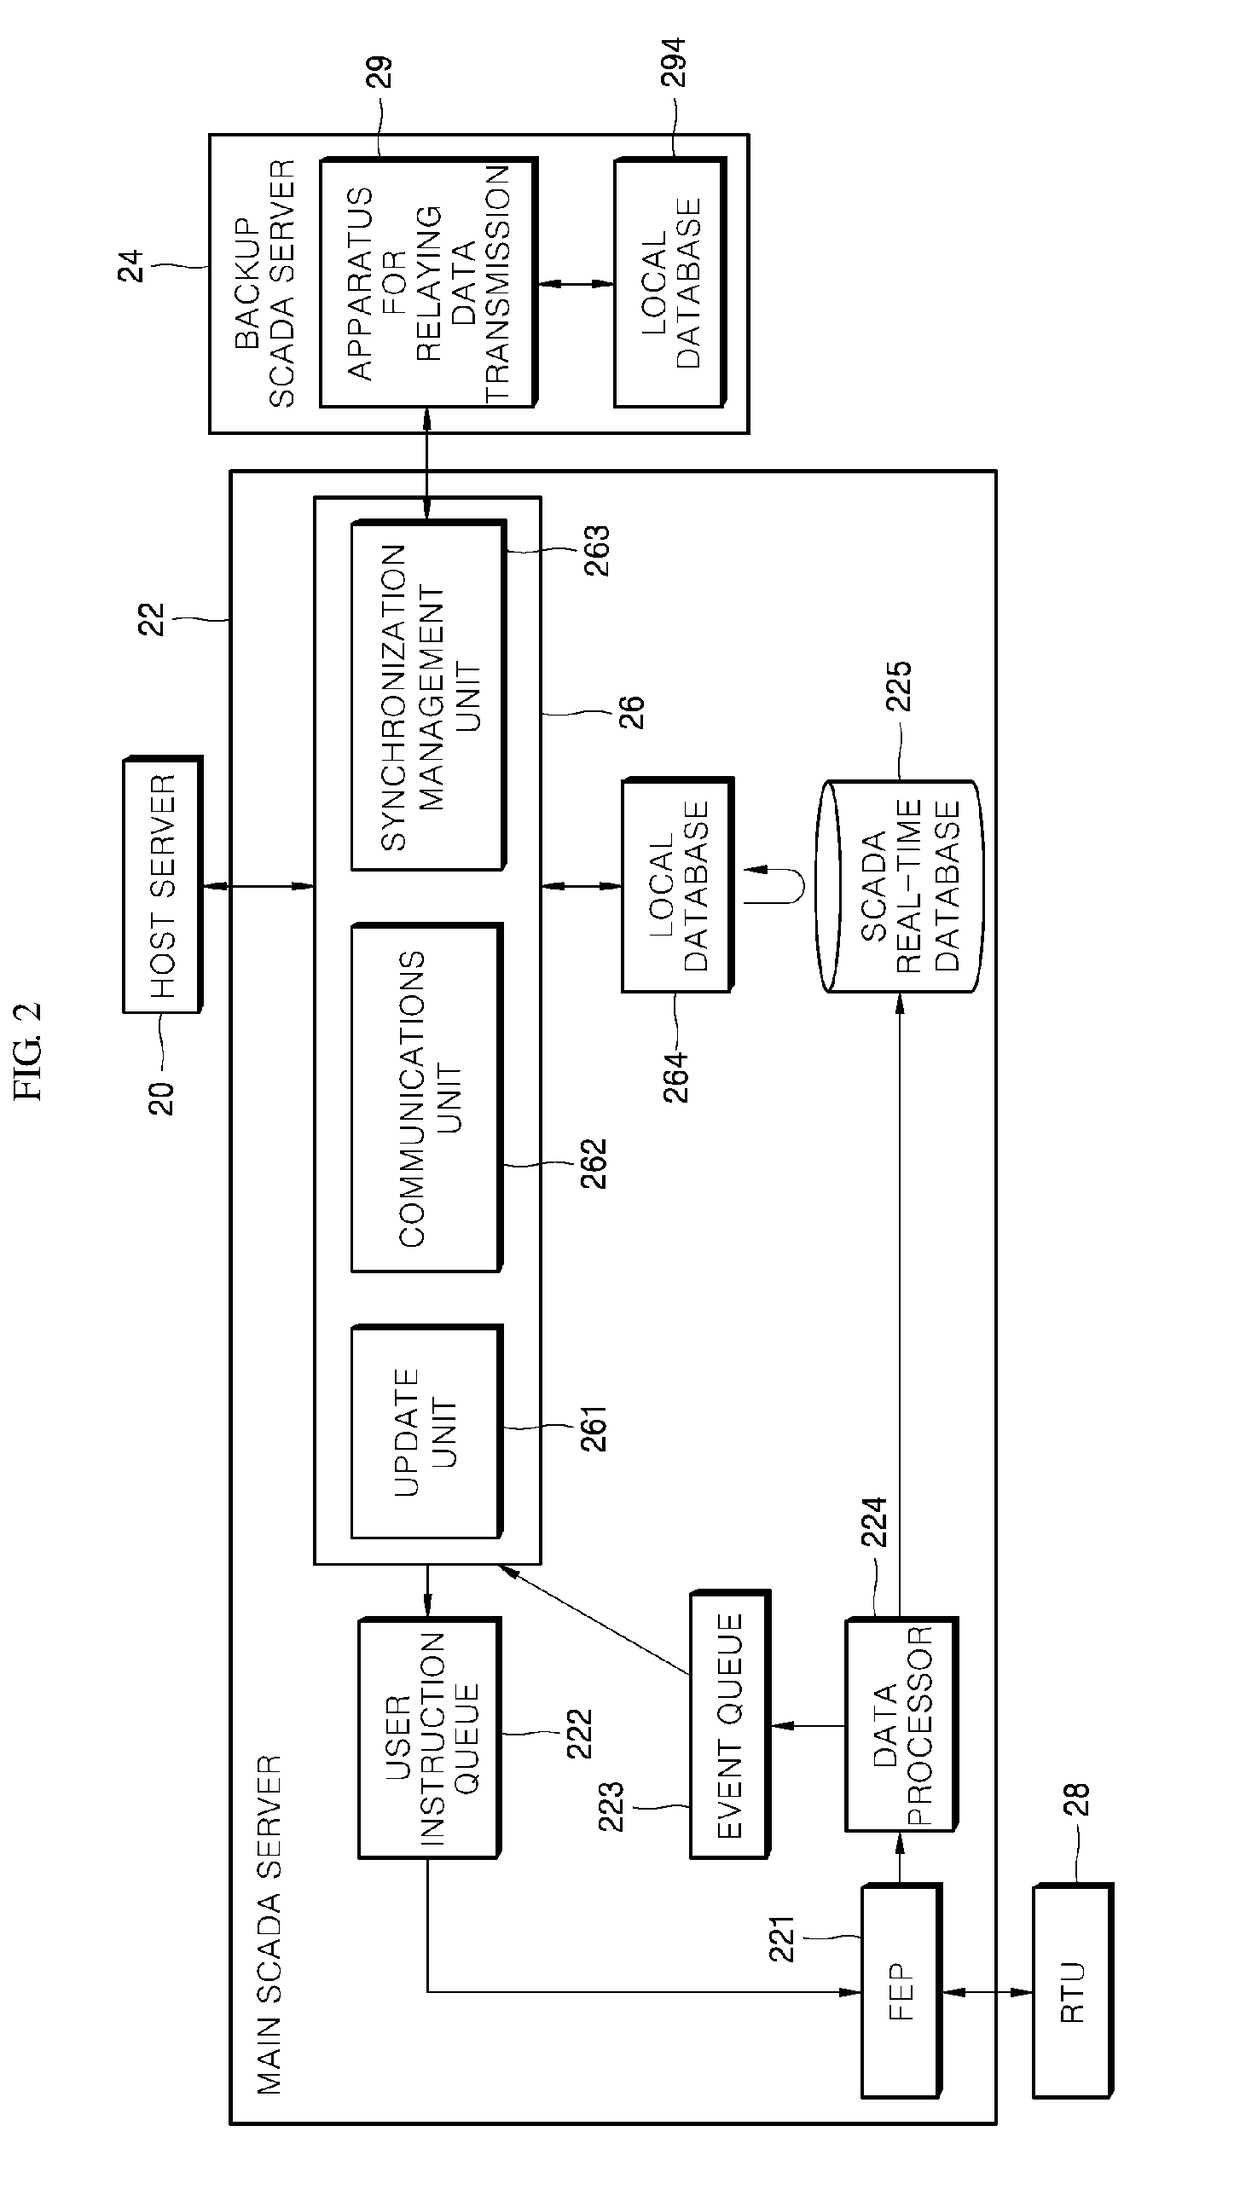 Apparatus for relaying data transmission in scada system